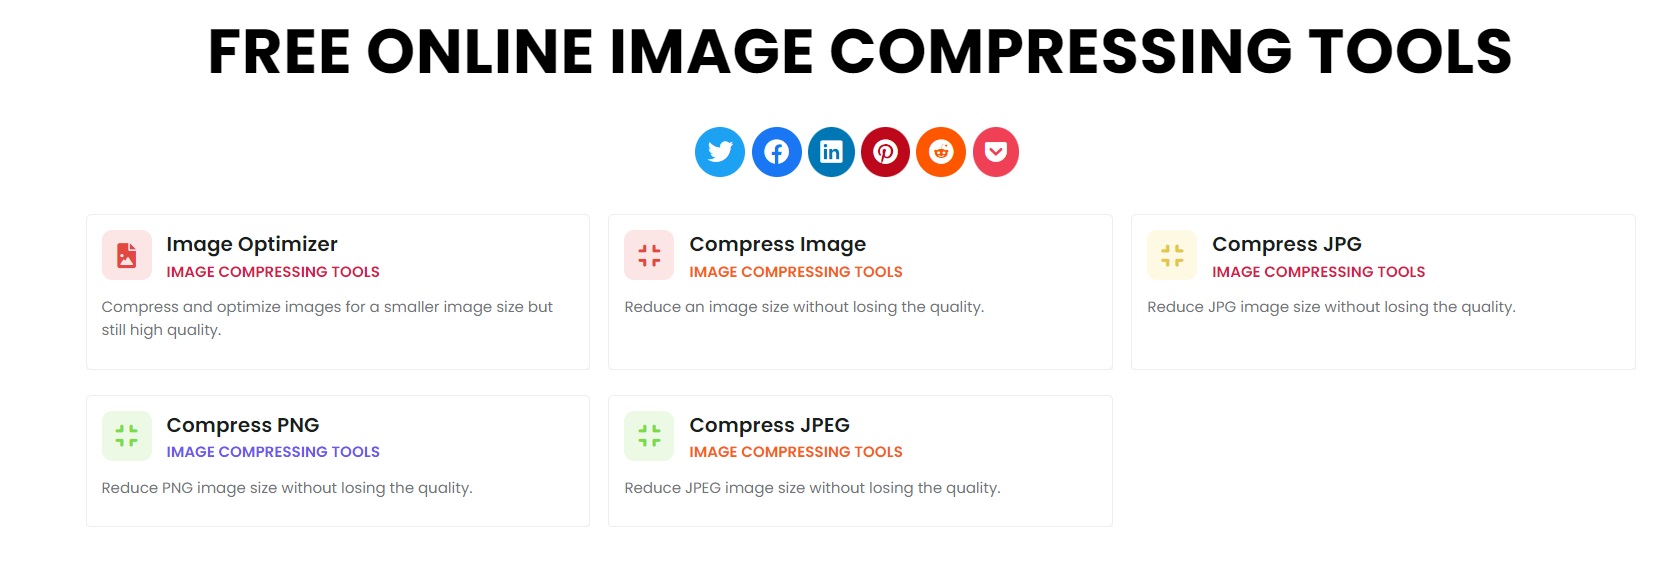 Compress your images